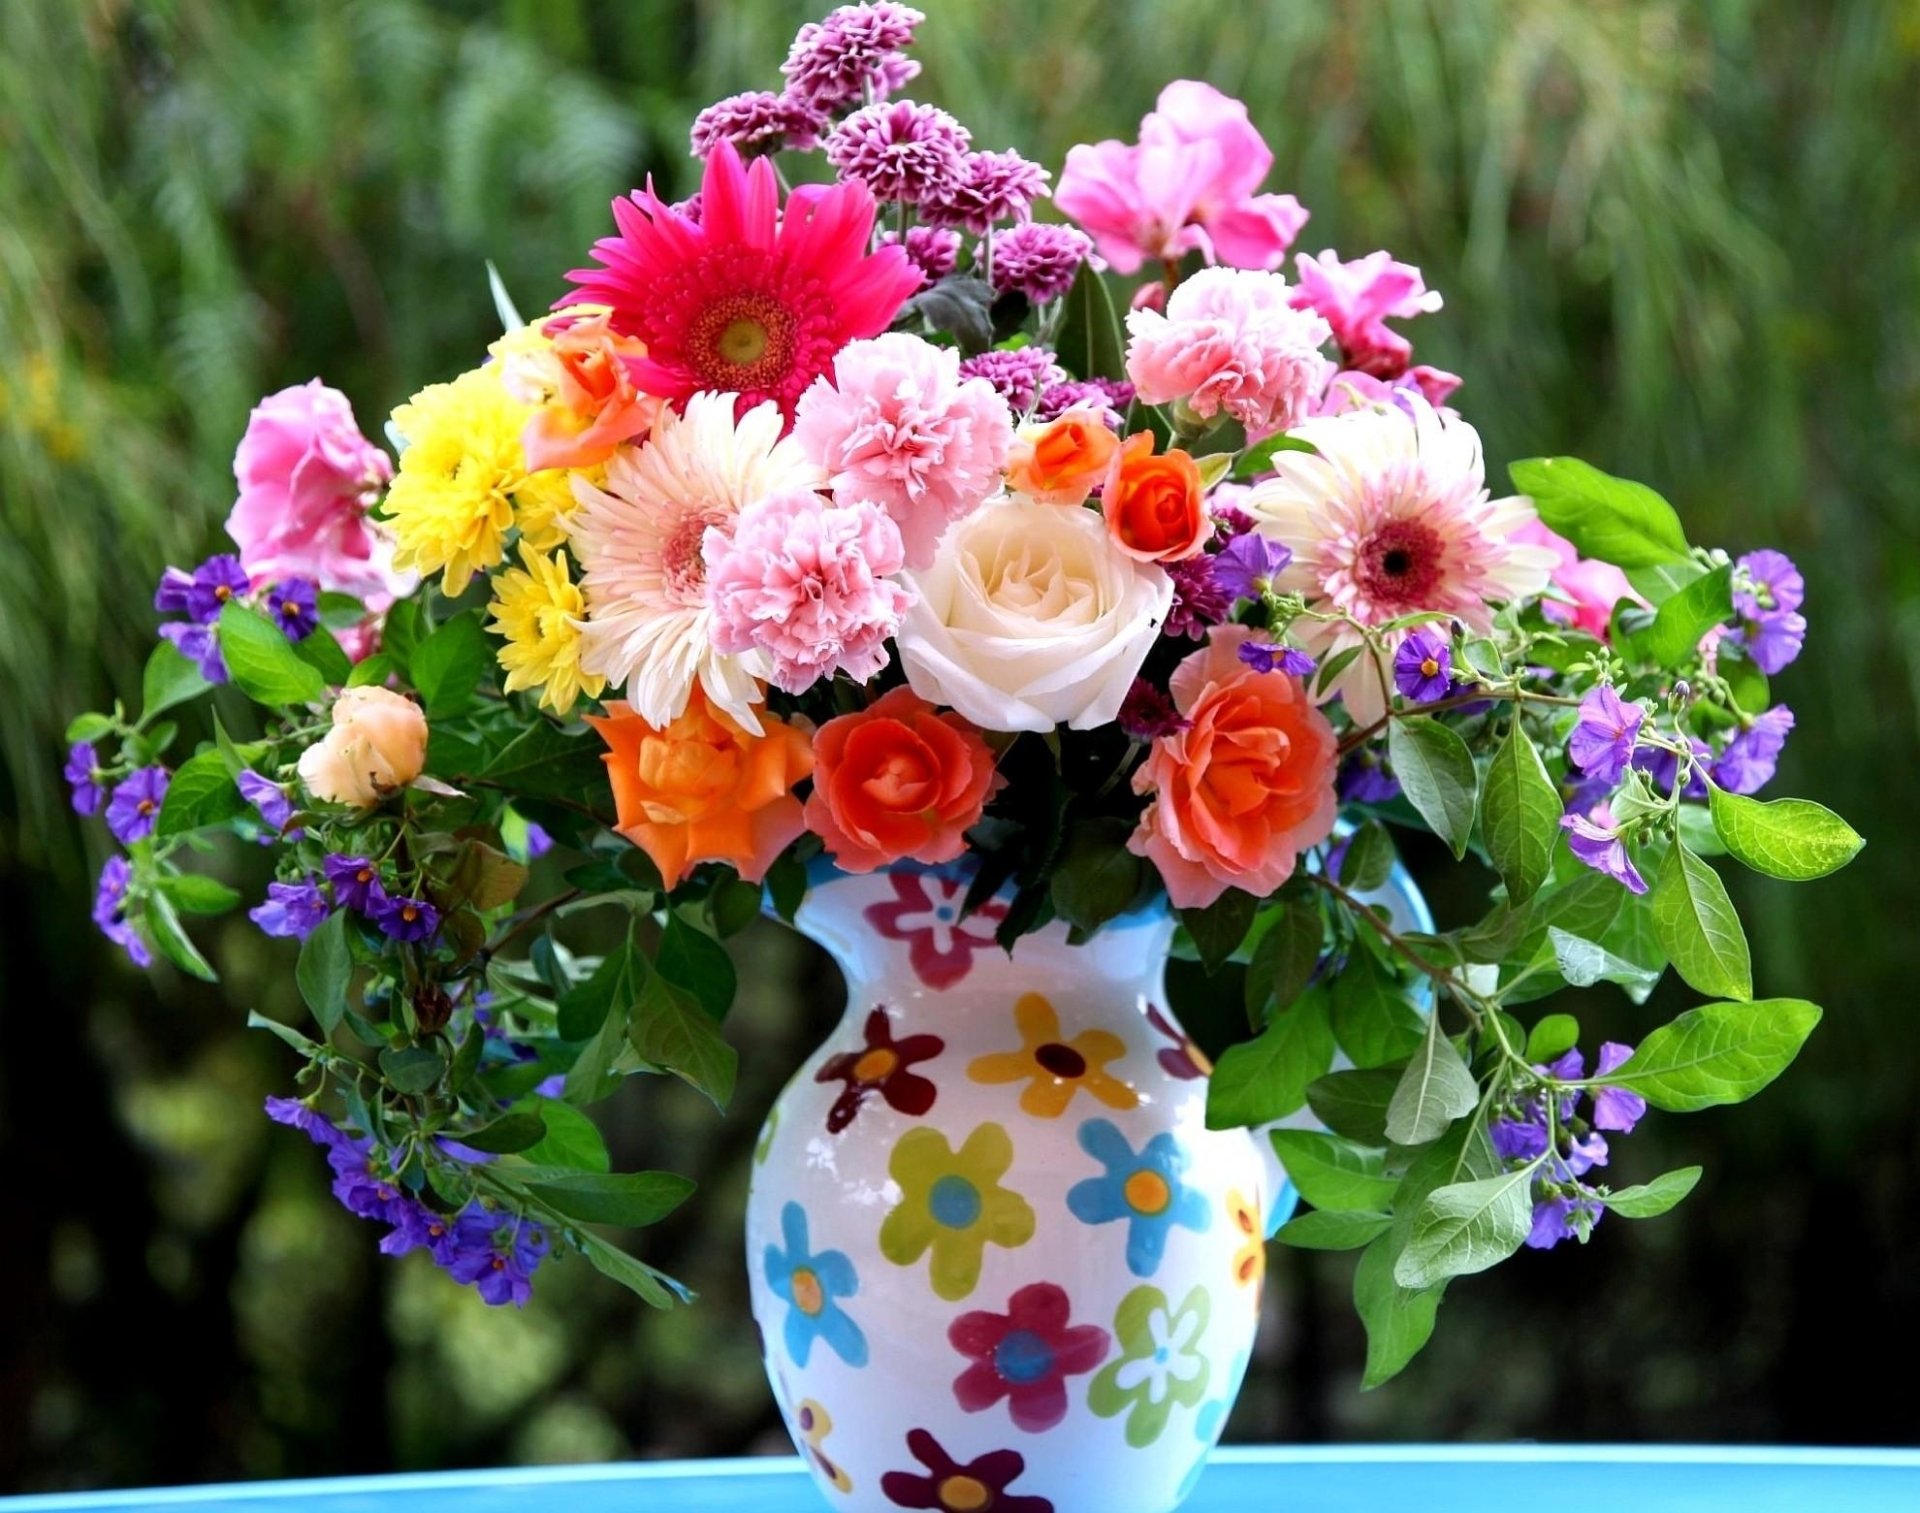 Lively Flowers In A Flower Vase